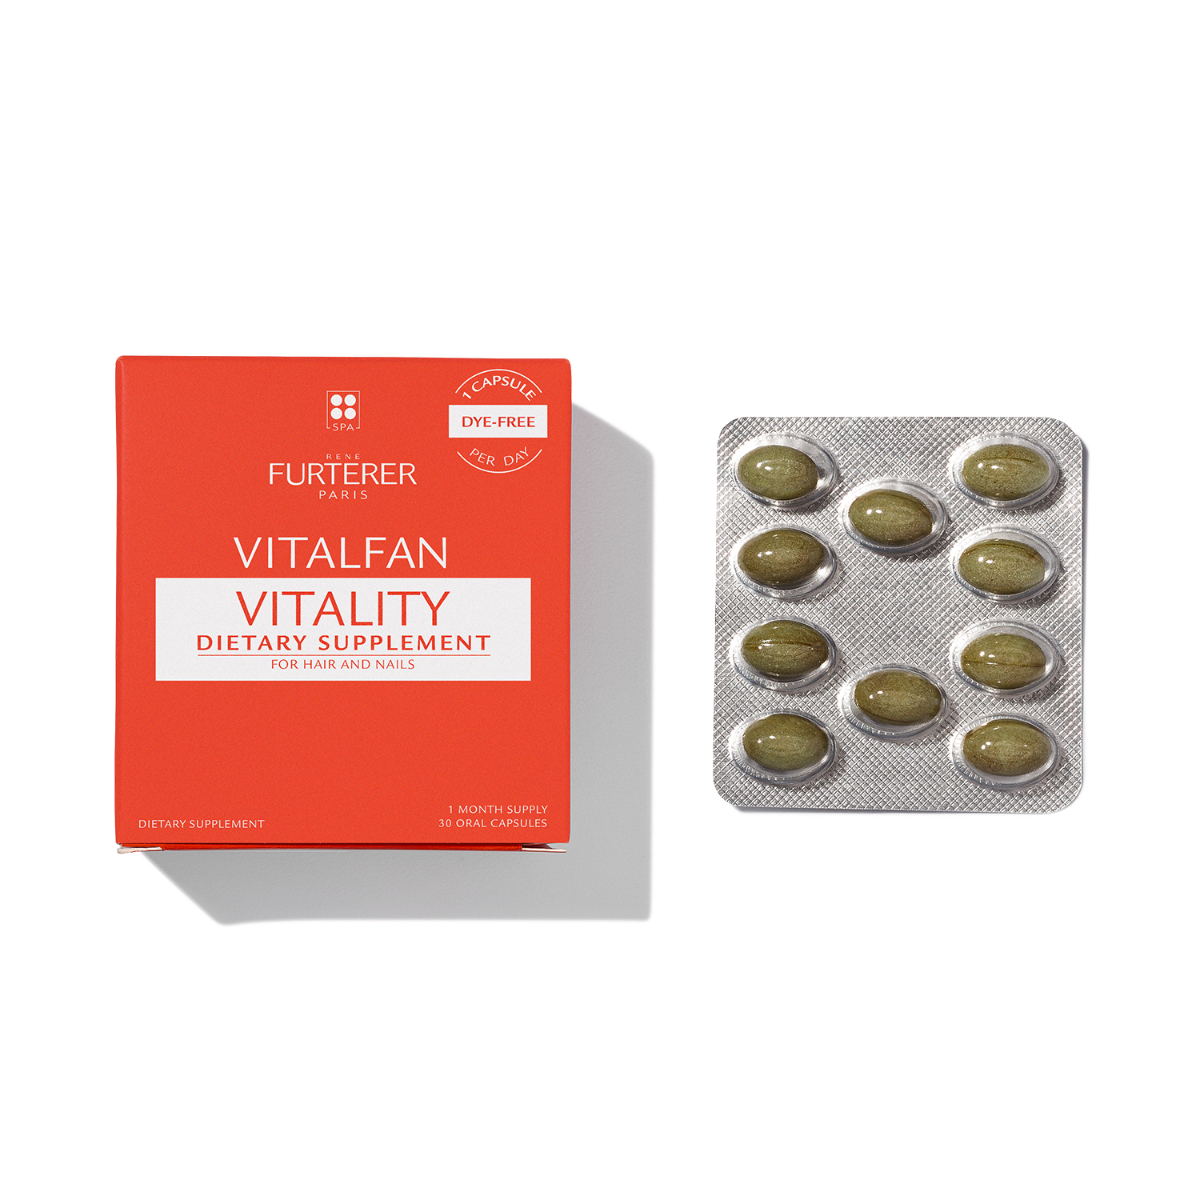 Vitalfan Dietary Supplement for Hair and Nails